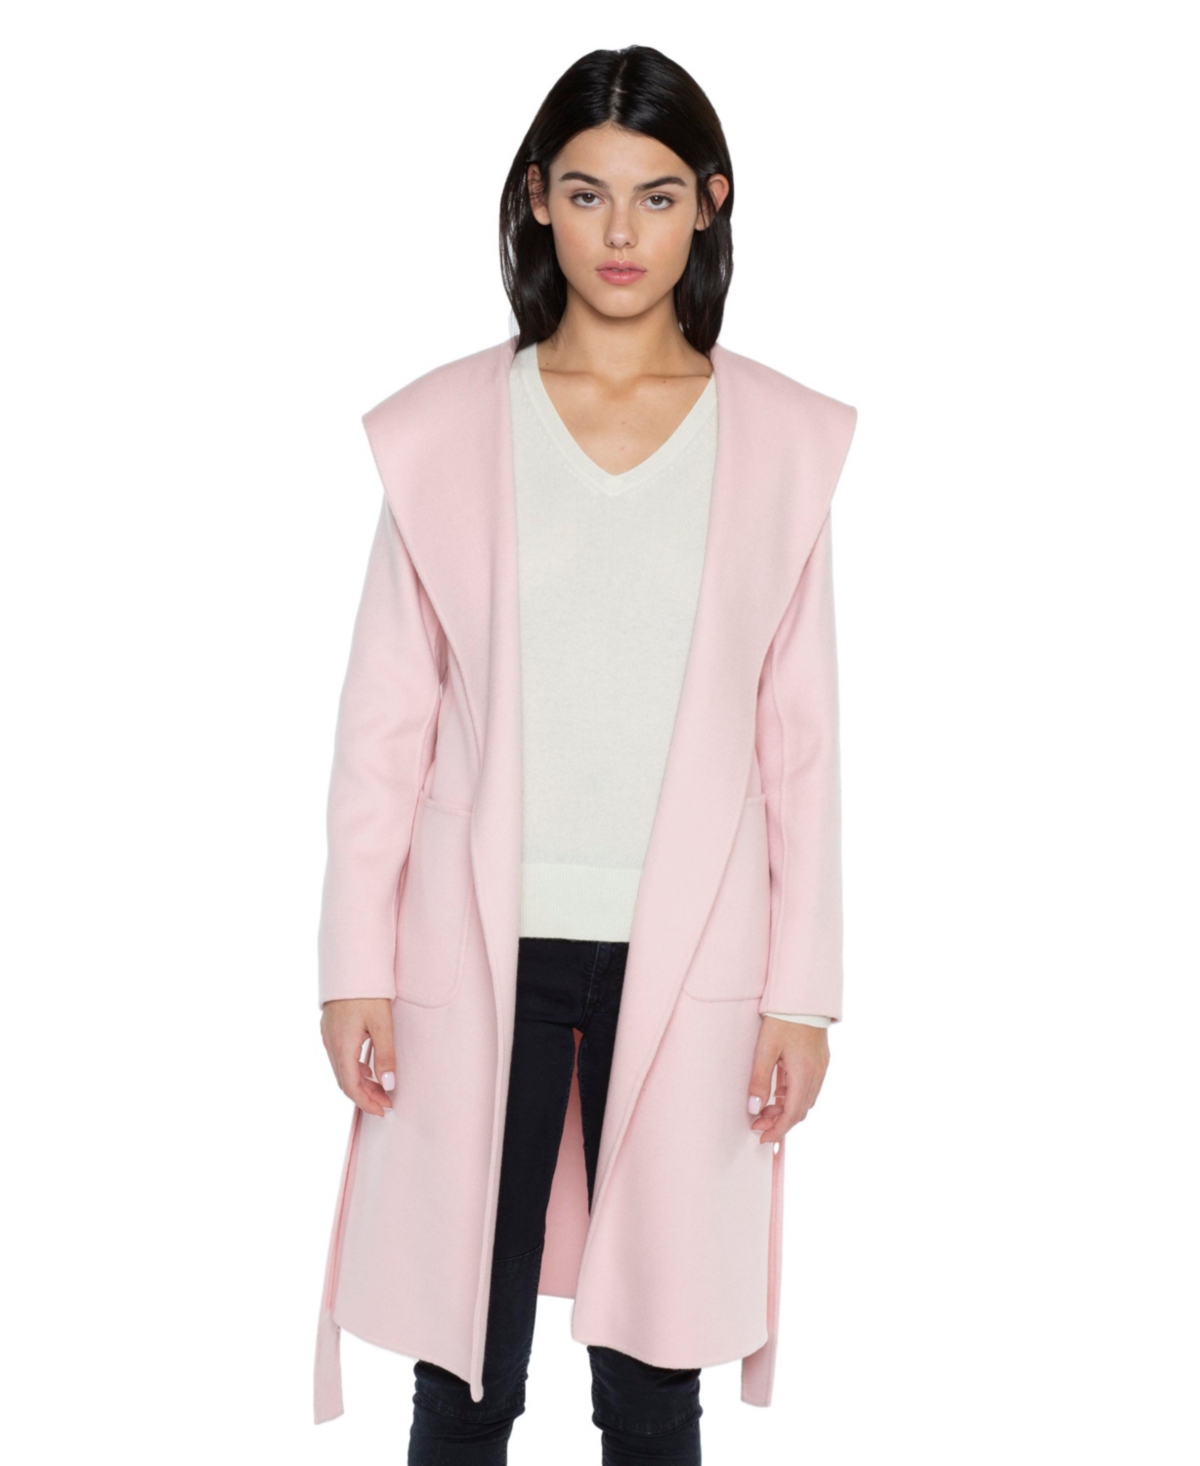 Women's Cashmere Wool Double Face Hooded Overcoat with Belt - Pink